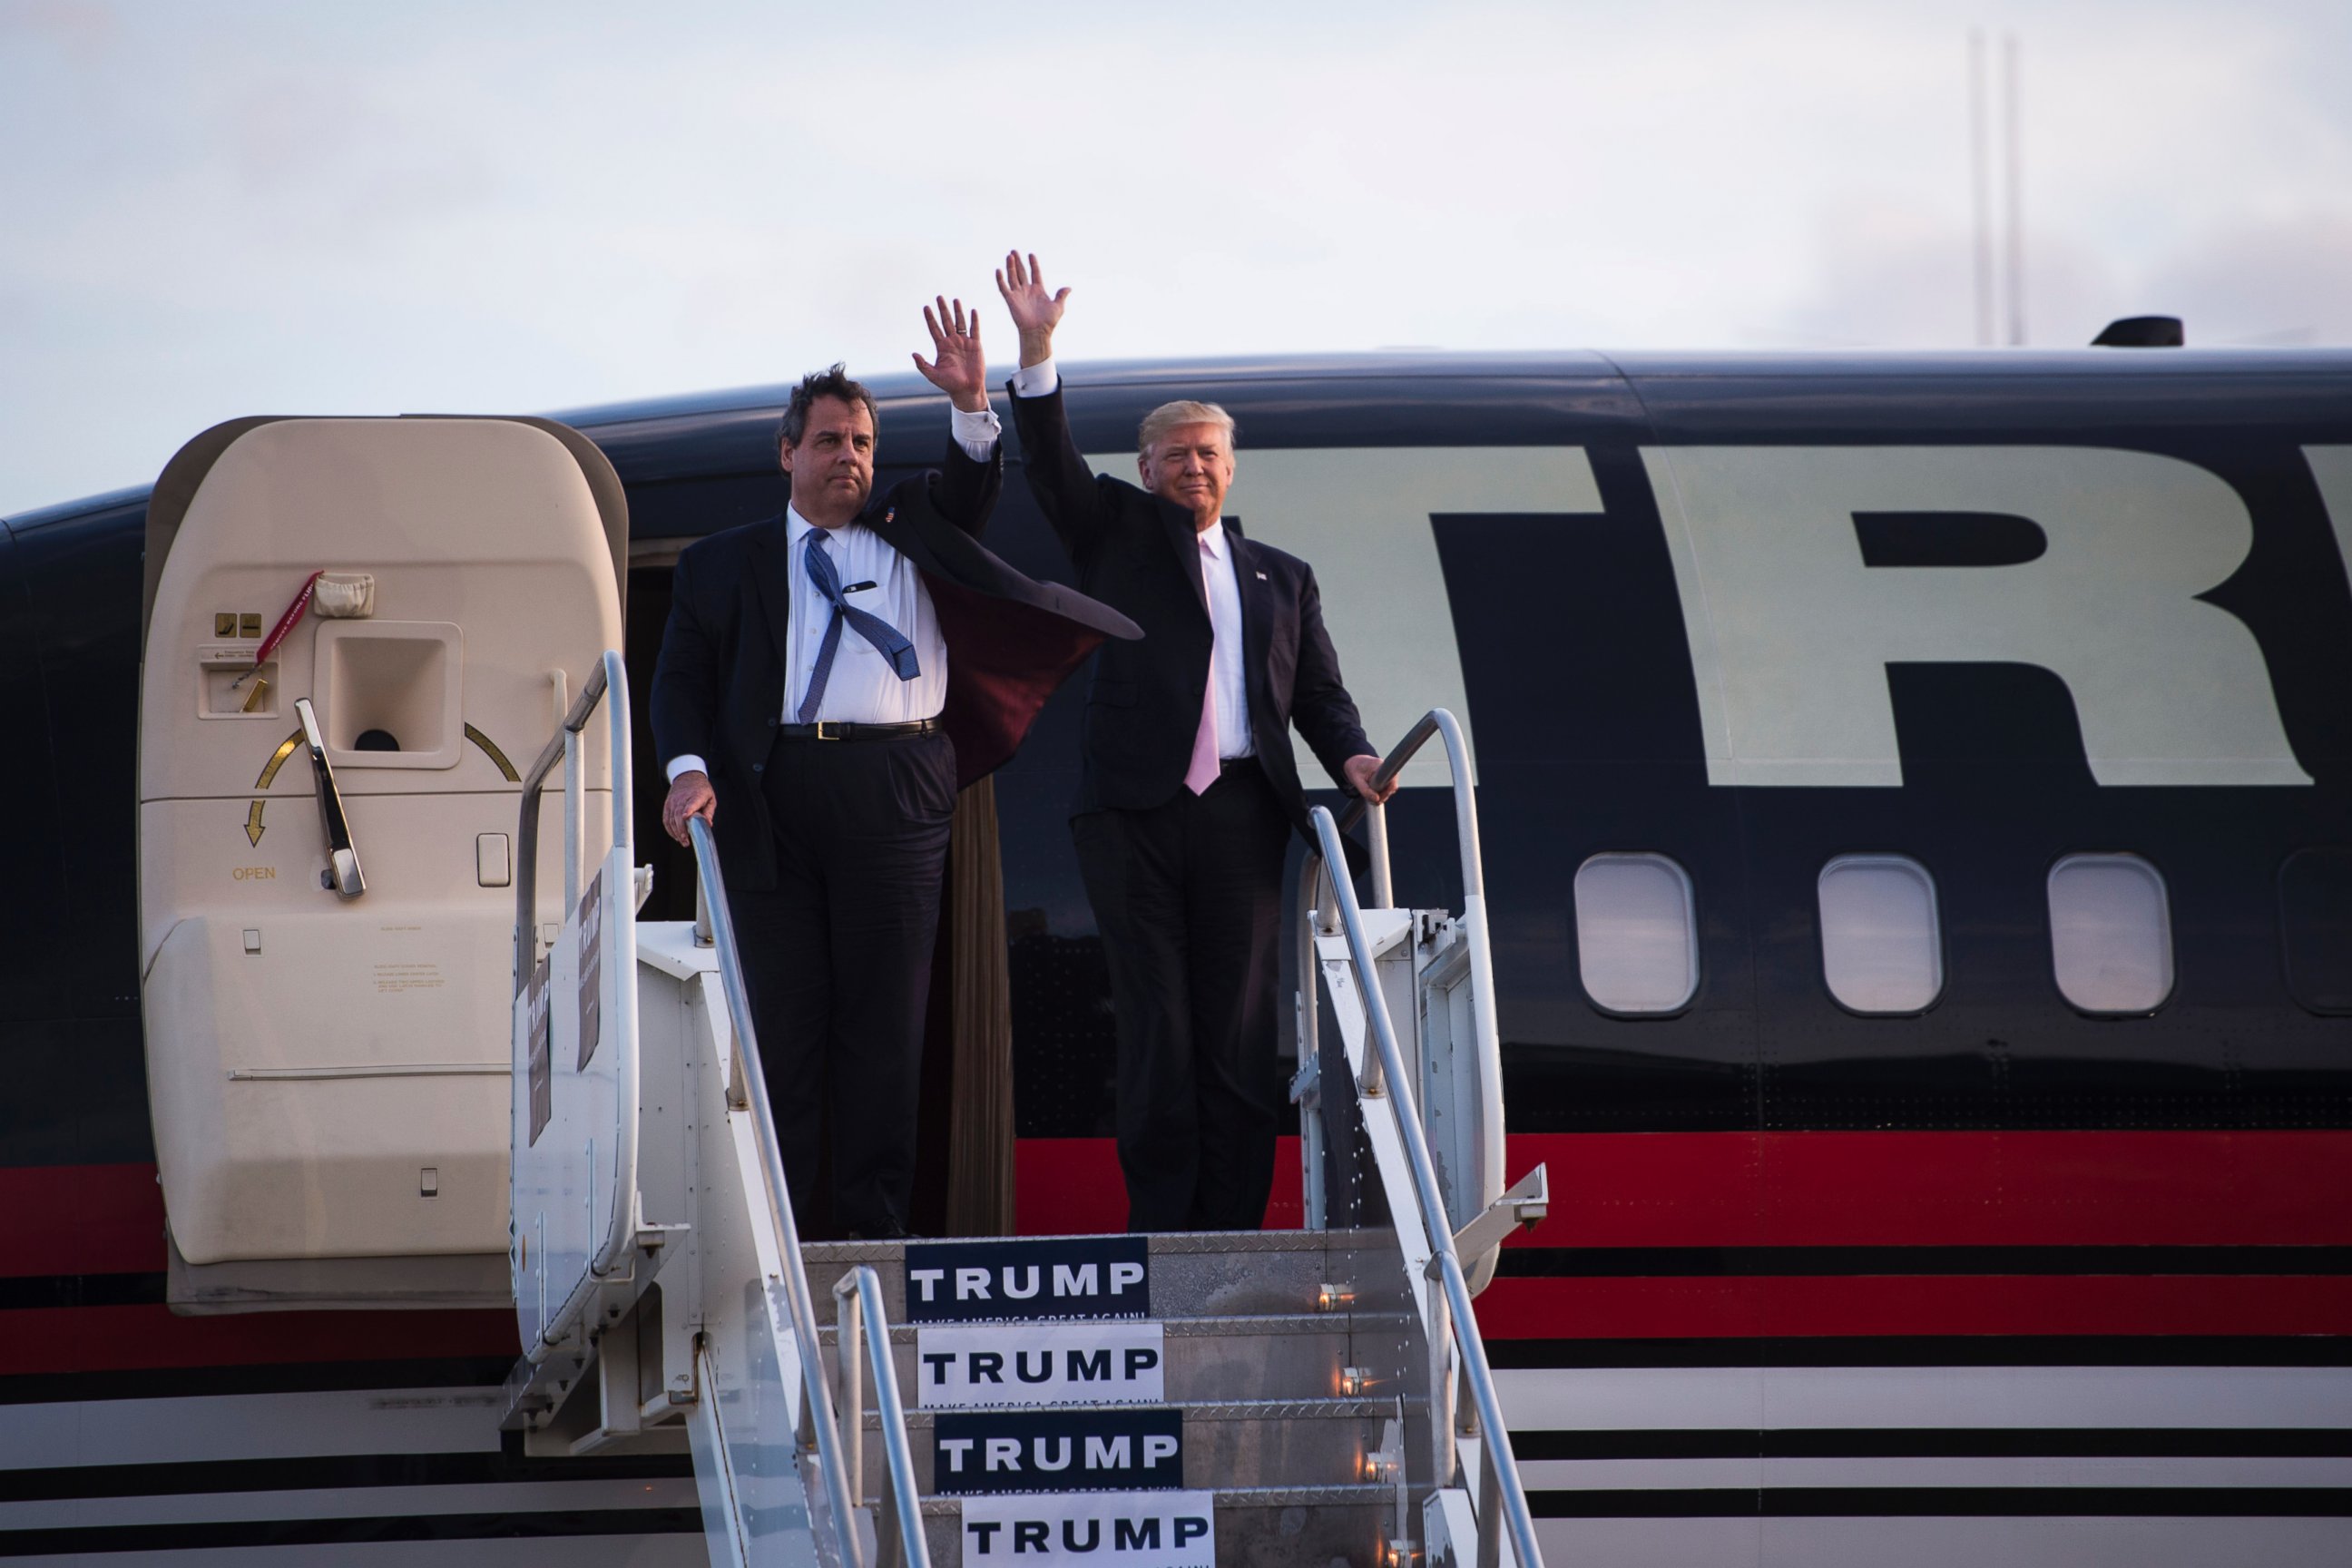 PHOTO: Republican presidential candidate Donald Trump and New Jersey Gov. Chris Christie arrive for a campaign event at Winner Aviation in Vienna, Ohio, March 14, 2016.